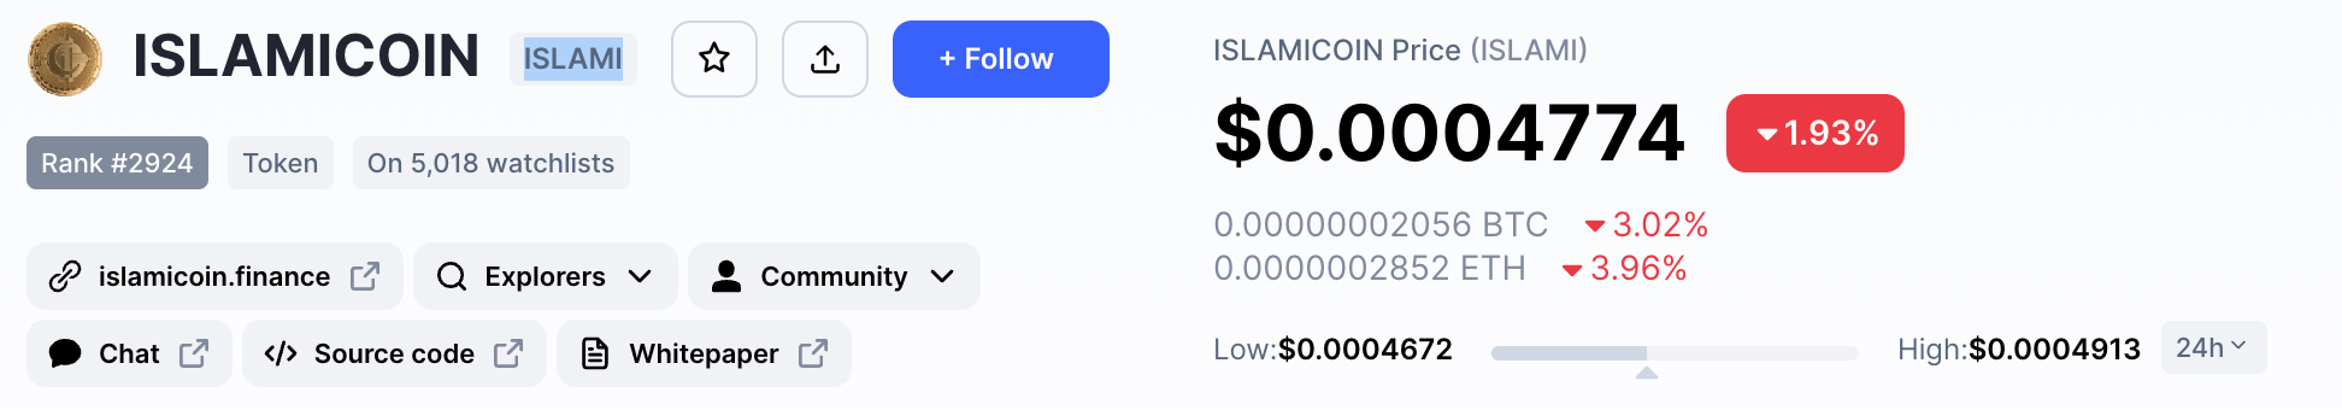 Muslim cryptocurrency and tokens